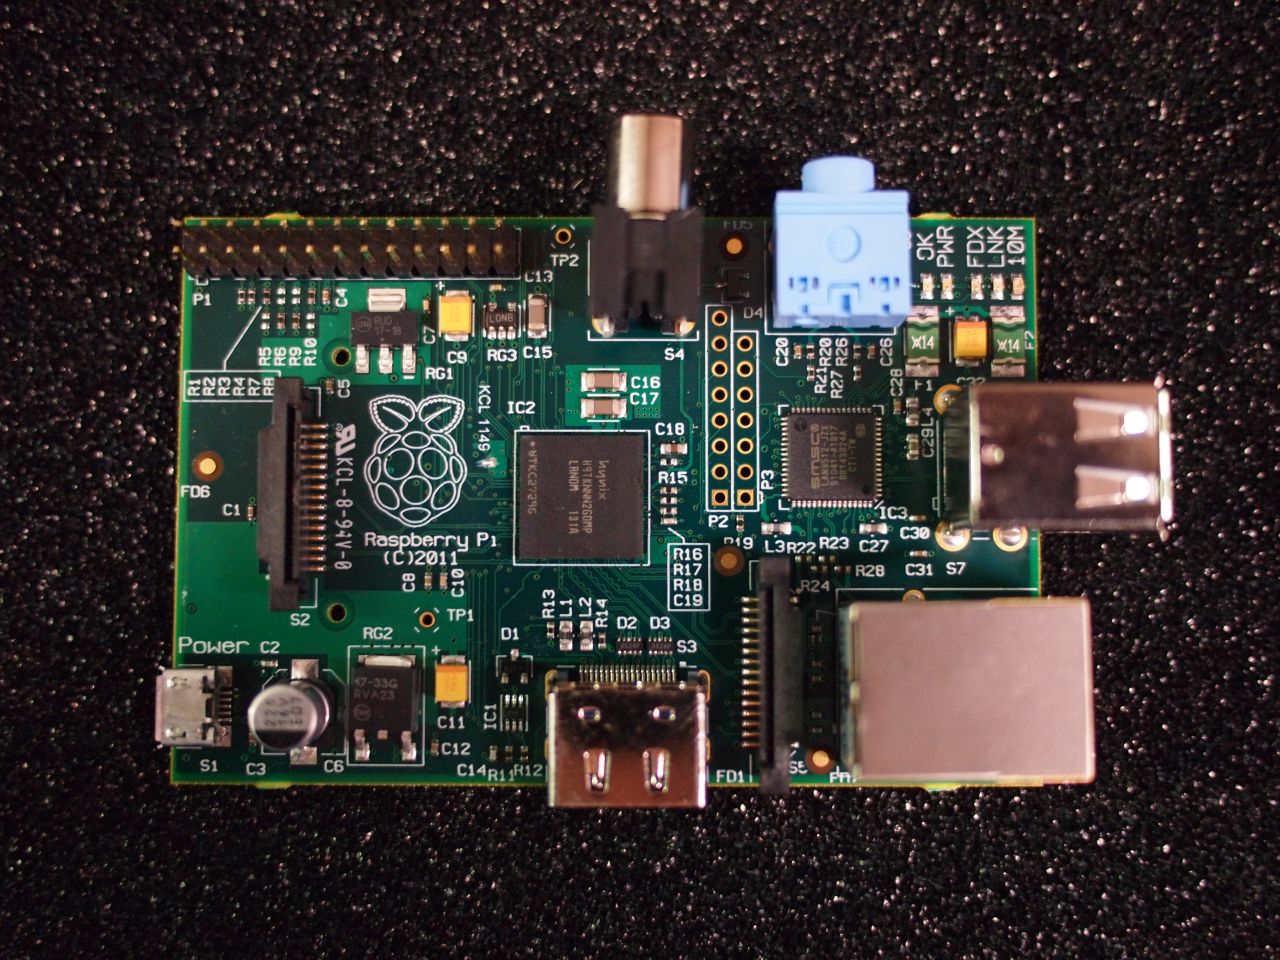 The $35 credit card-sized Raspberry Pi computer sold out within hours of its debut Wednesday.